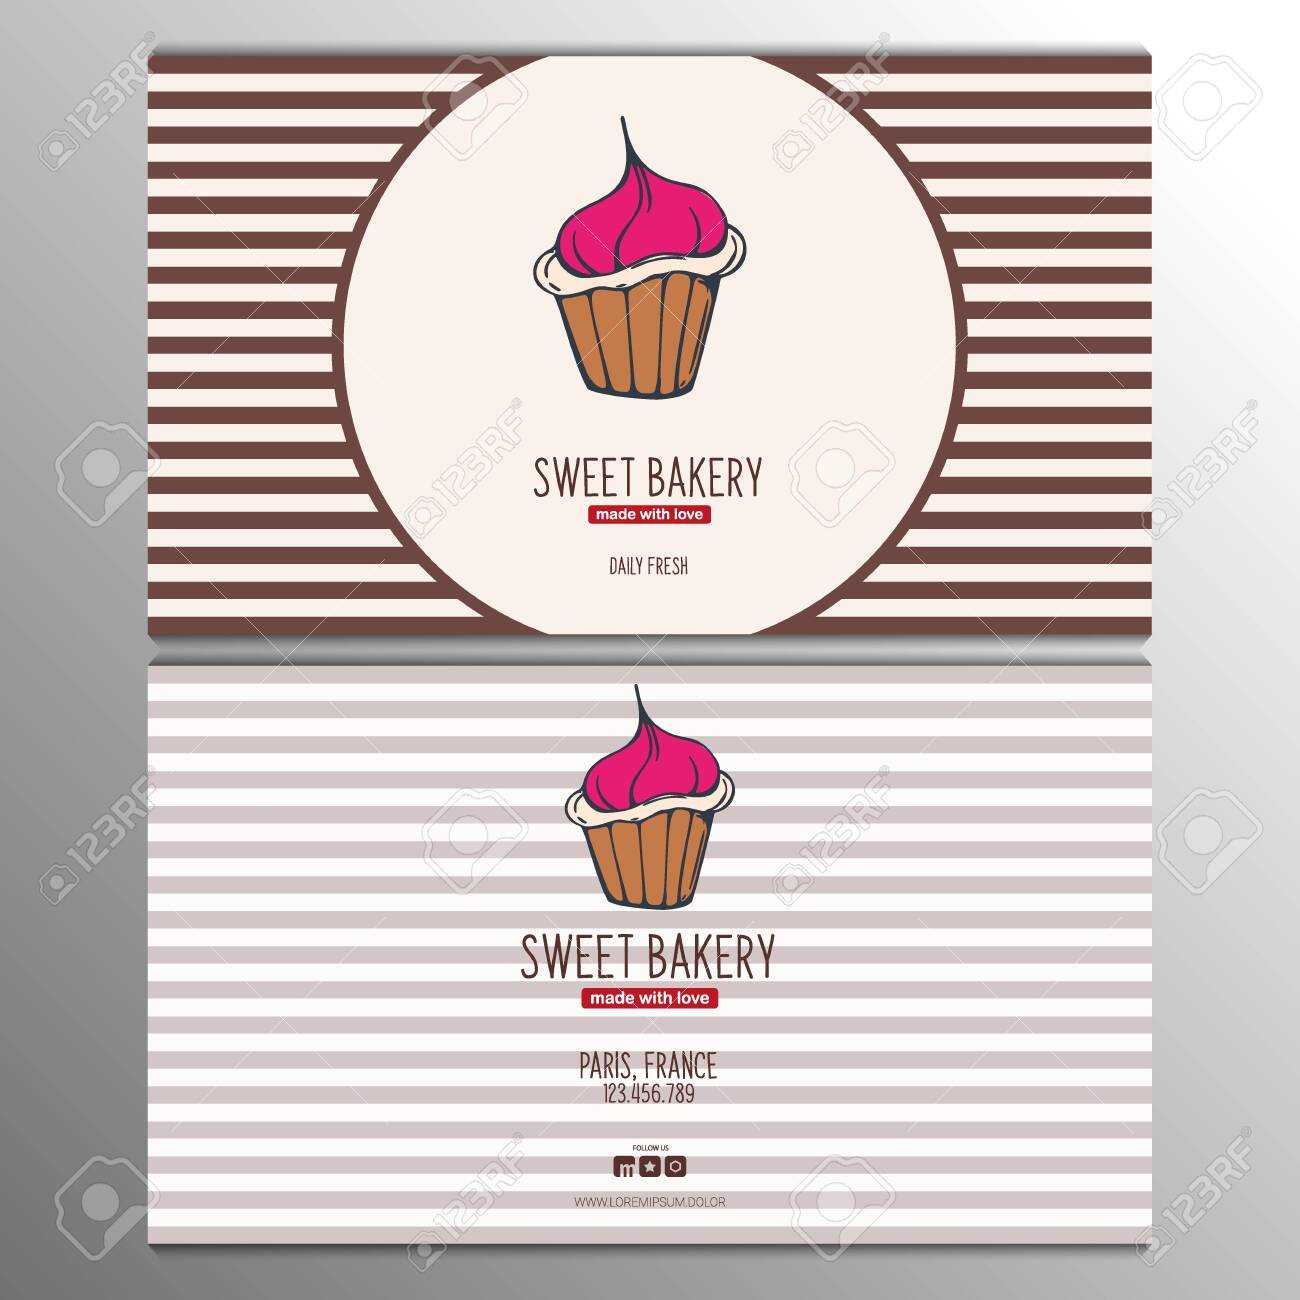 Cupcake Or Cake Business Card Template For Bakery Or Pastry. With Regard To Cake Business Cards Templates Free